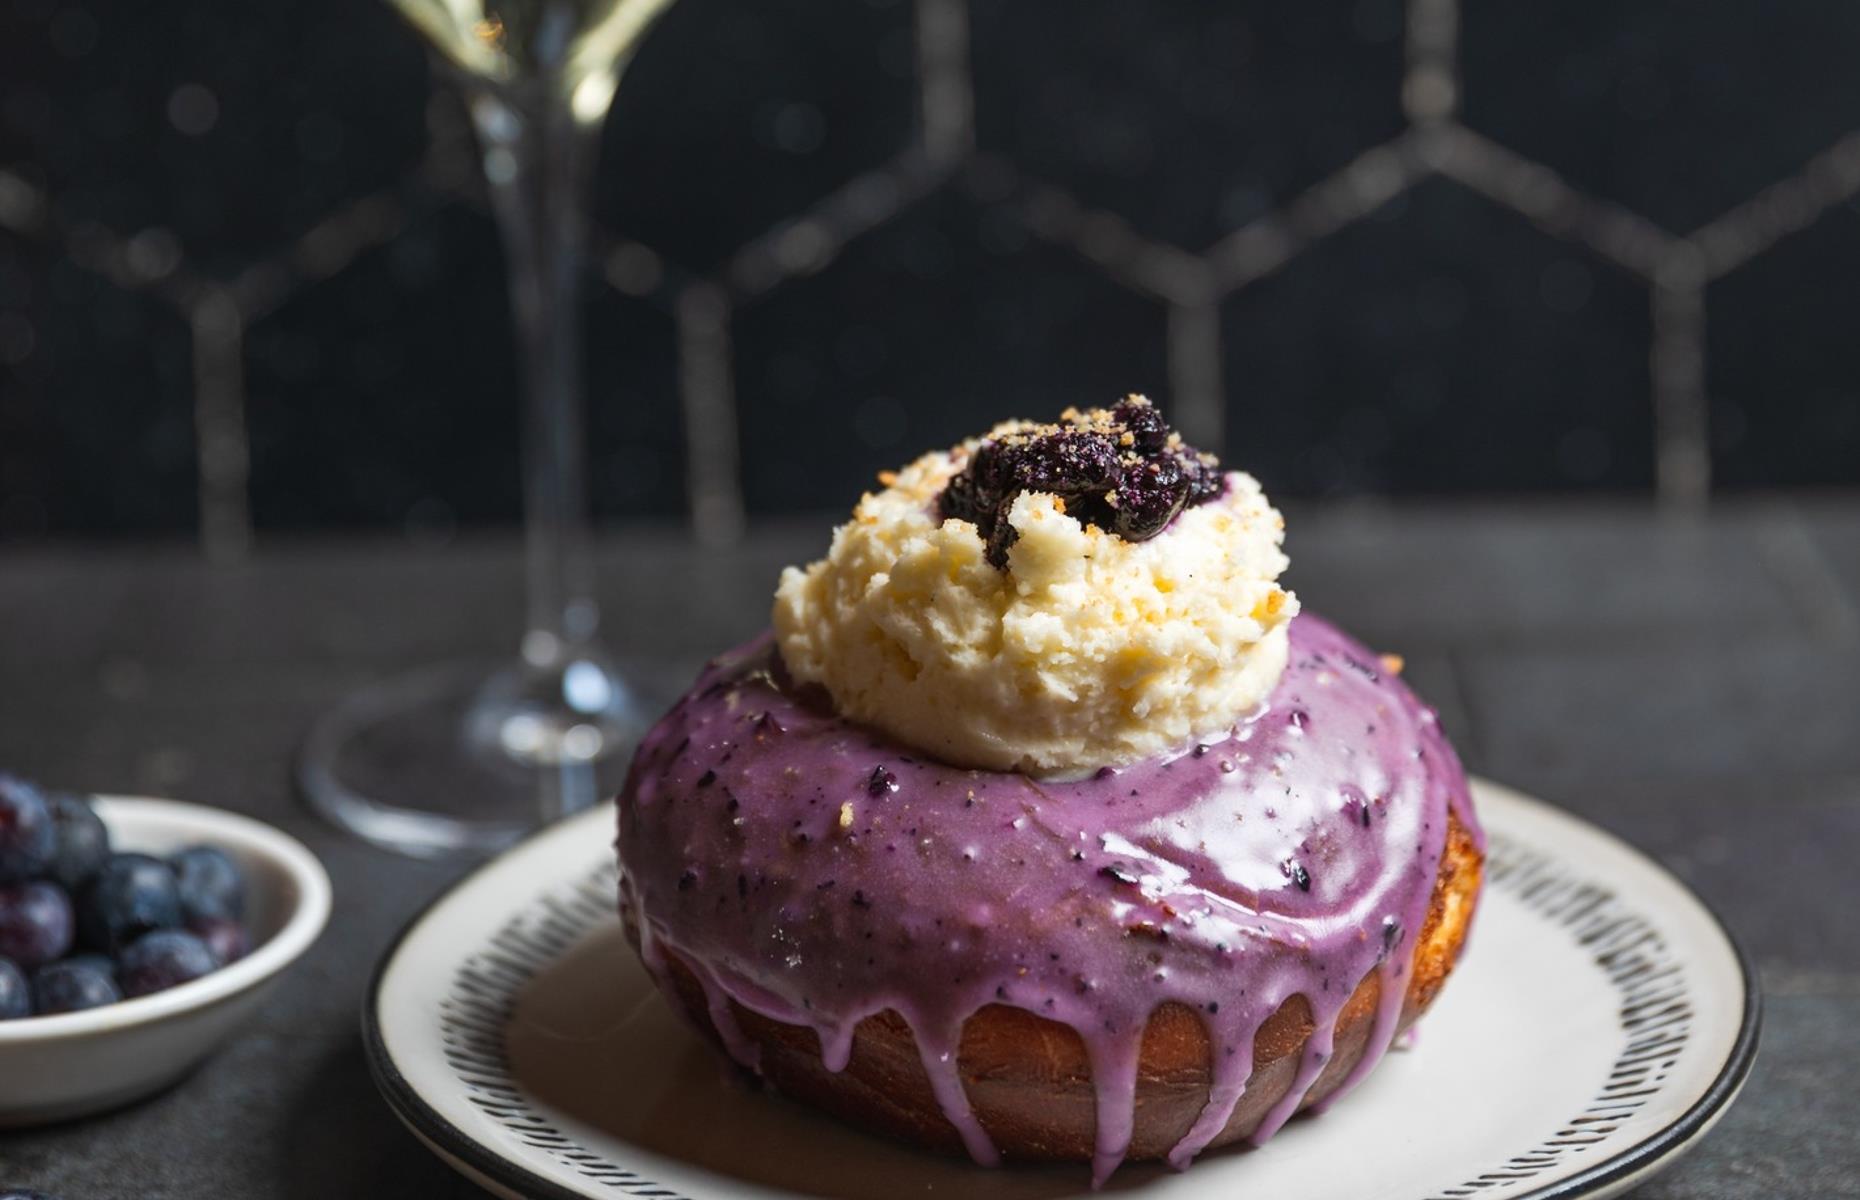 <p>At least two indulgent treats packed into one delicious round, this Blueberries & Champagne donut from California mini-chain <a href="https://www.facebook.com/SidecarDoughnuts/">Sidecar</a> is the ultimate in sweet luxury. One of the company’s regular seasonal specials, released for early 2022, it starts with a raised bullseye donut (a traditional style with a little divot to hold a dollop of something) and is dipped in blueberry glaze and topped with blueberry and Champagne compote, lemon cheesecake mousse and crumbled sugar cookies.</p>